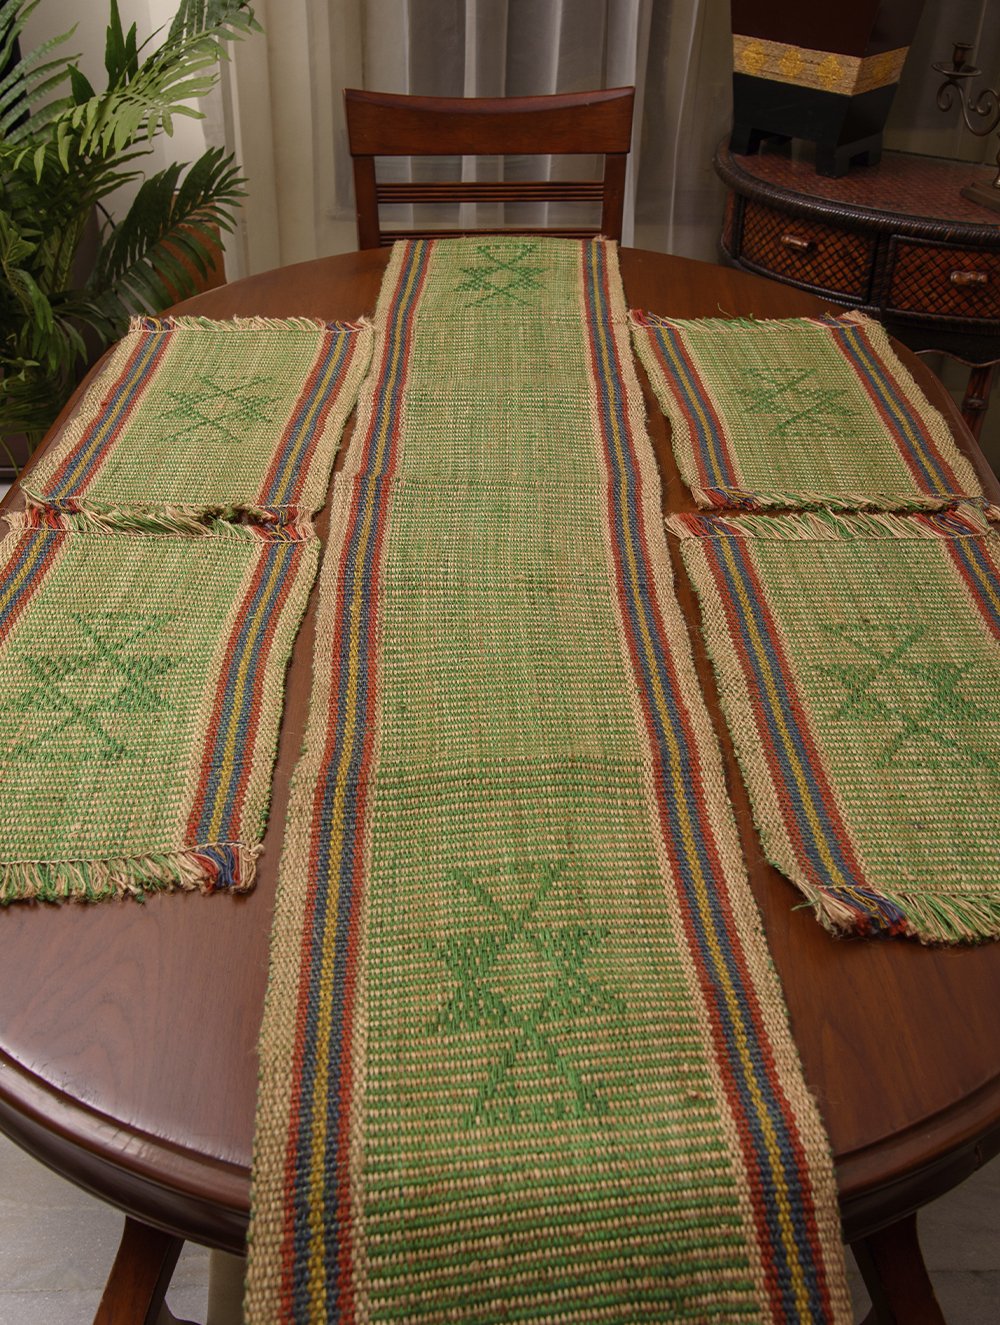 Load image into Gallery viewer, Handwoven Jute Table Runner &amp; Mats (Set of 5) - Light Green &amp; Beige